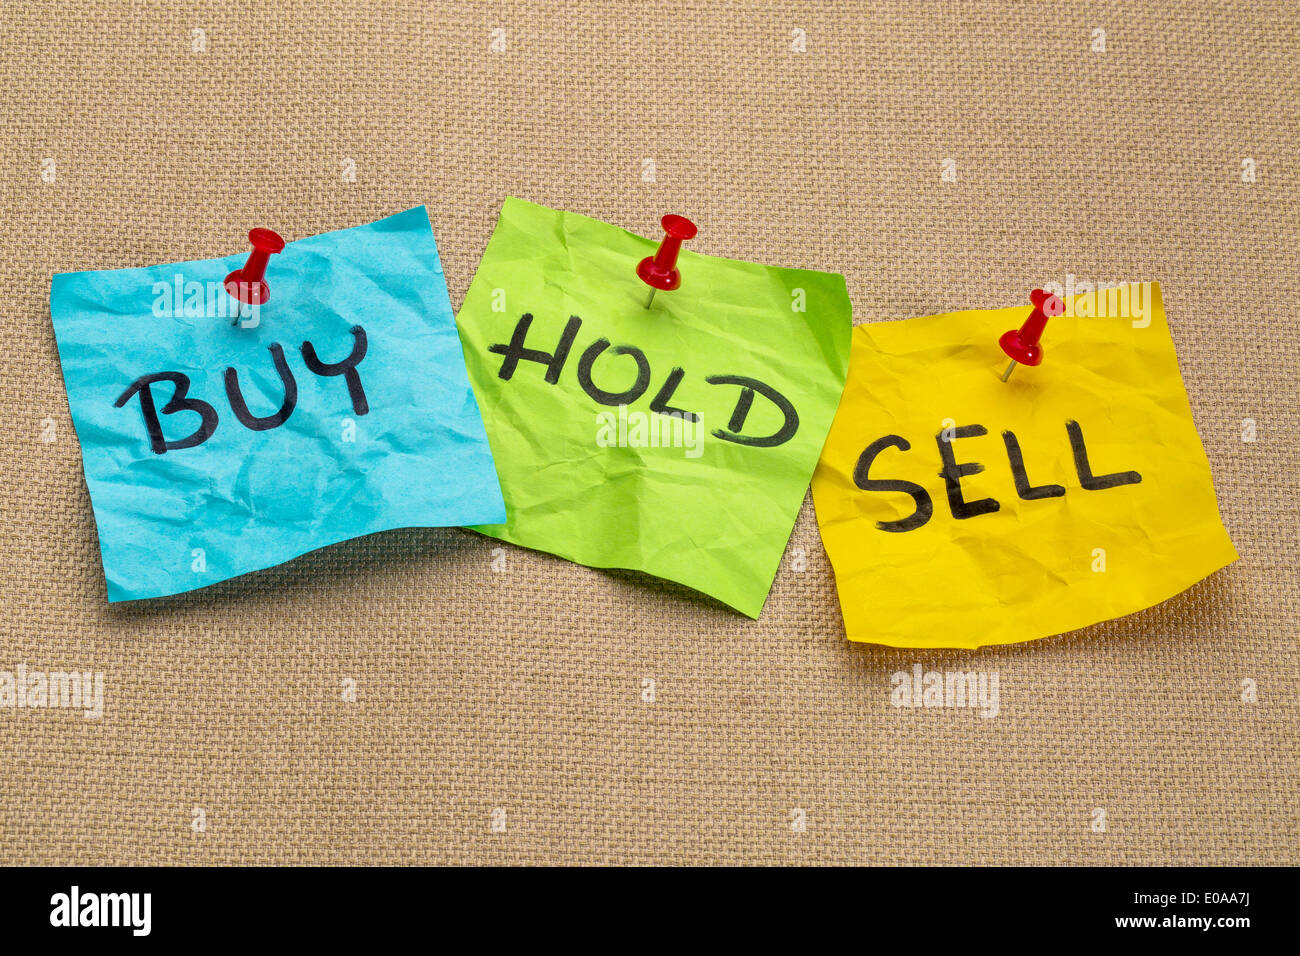 buy, hold, sell - investing concept - handwritten words on sticky notes Stock Photo